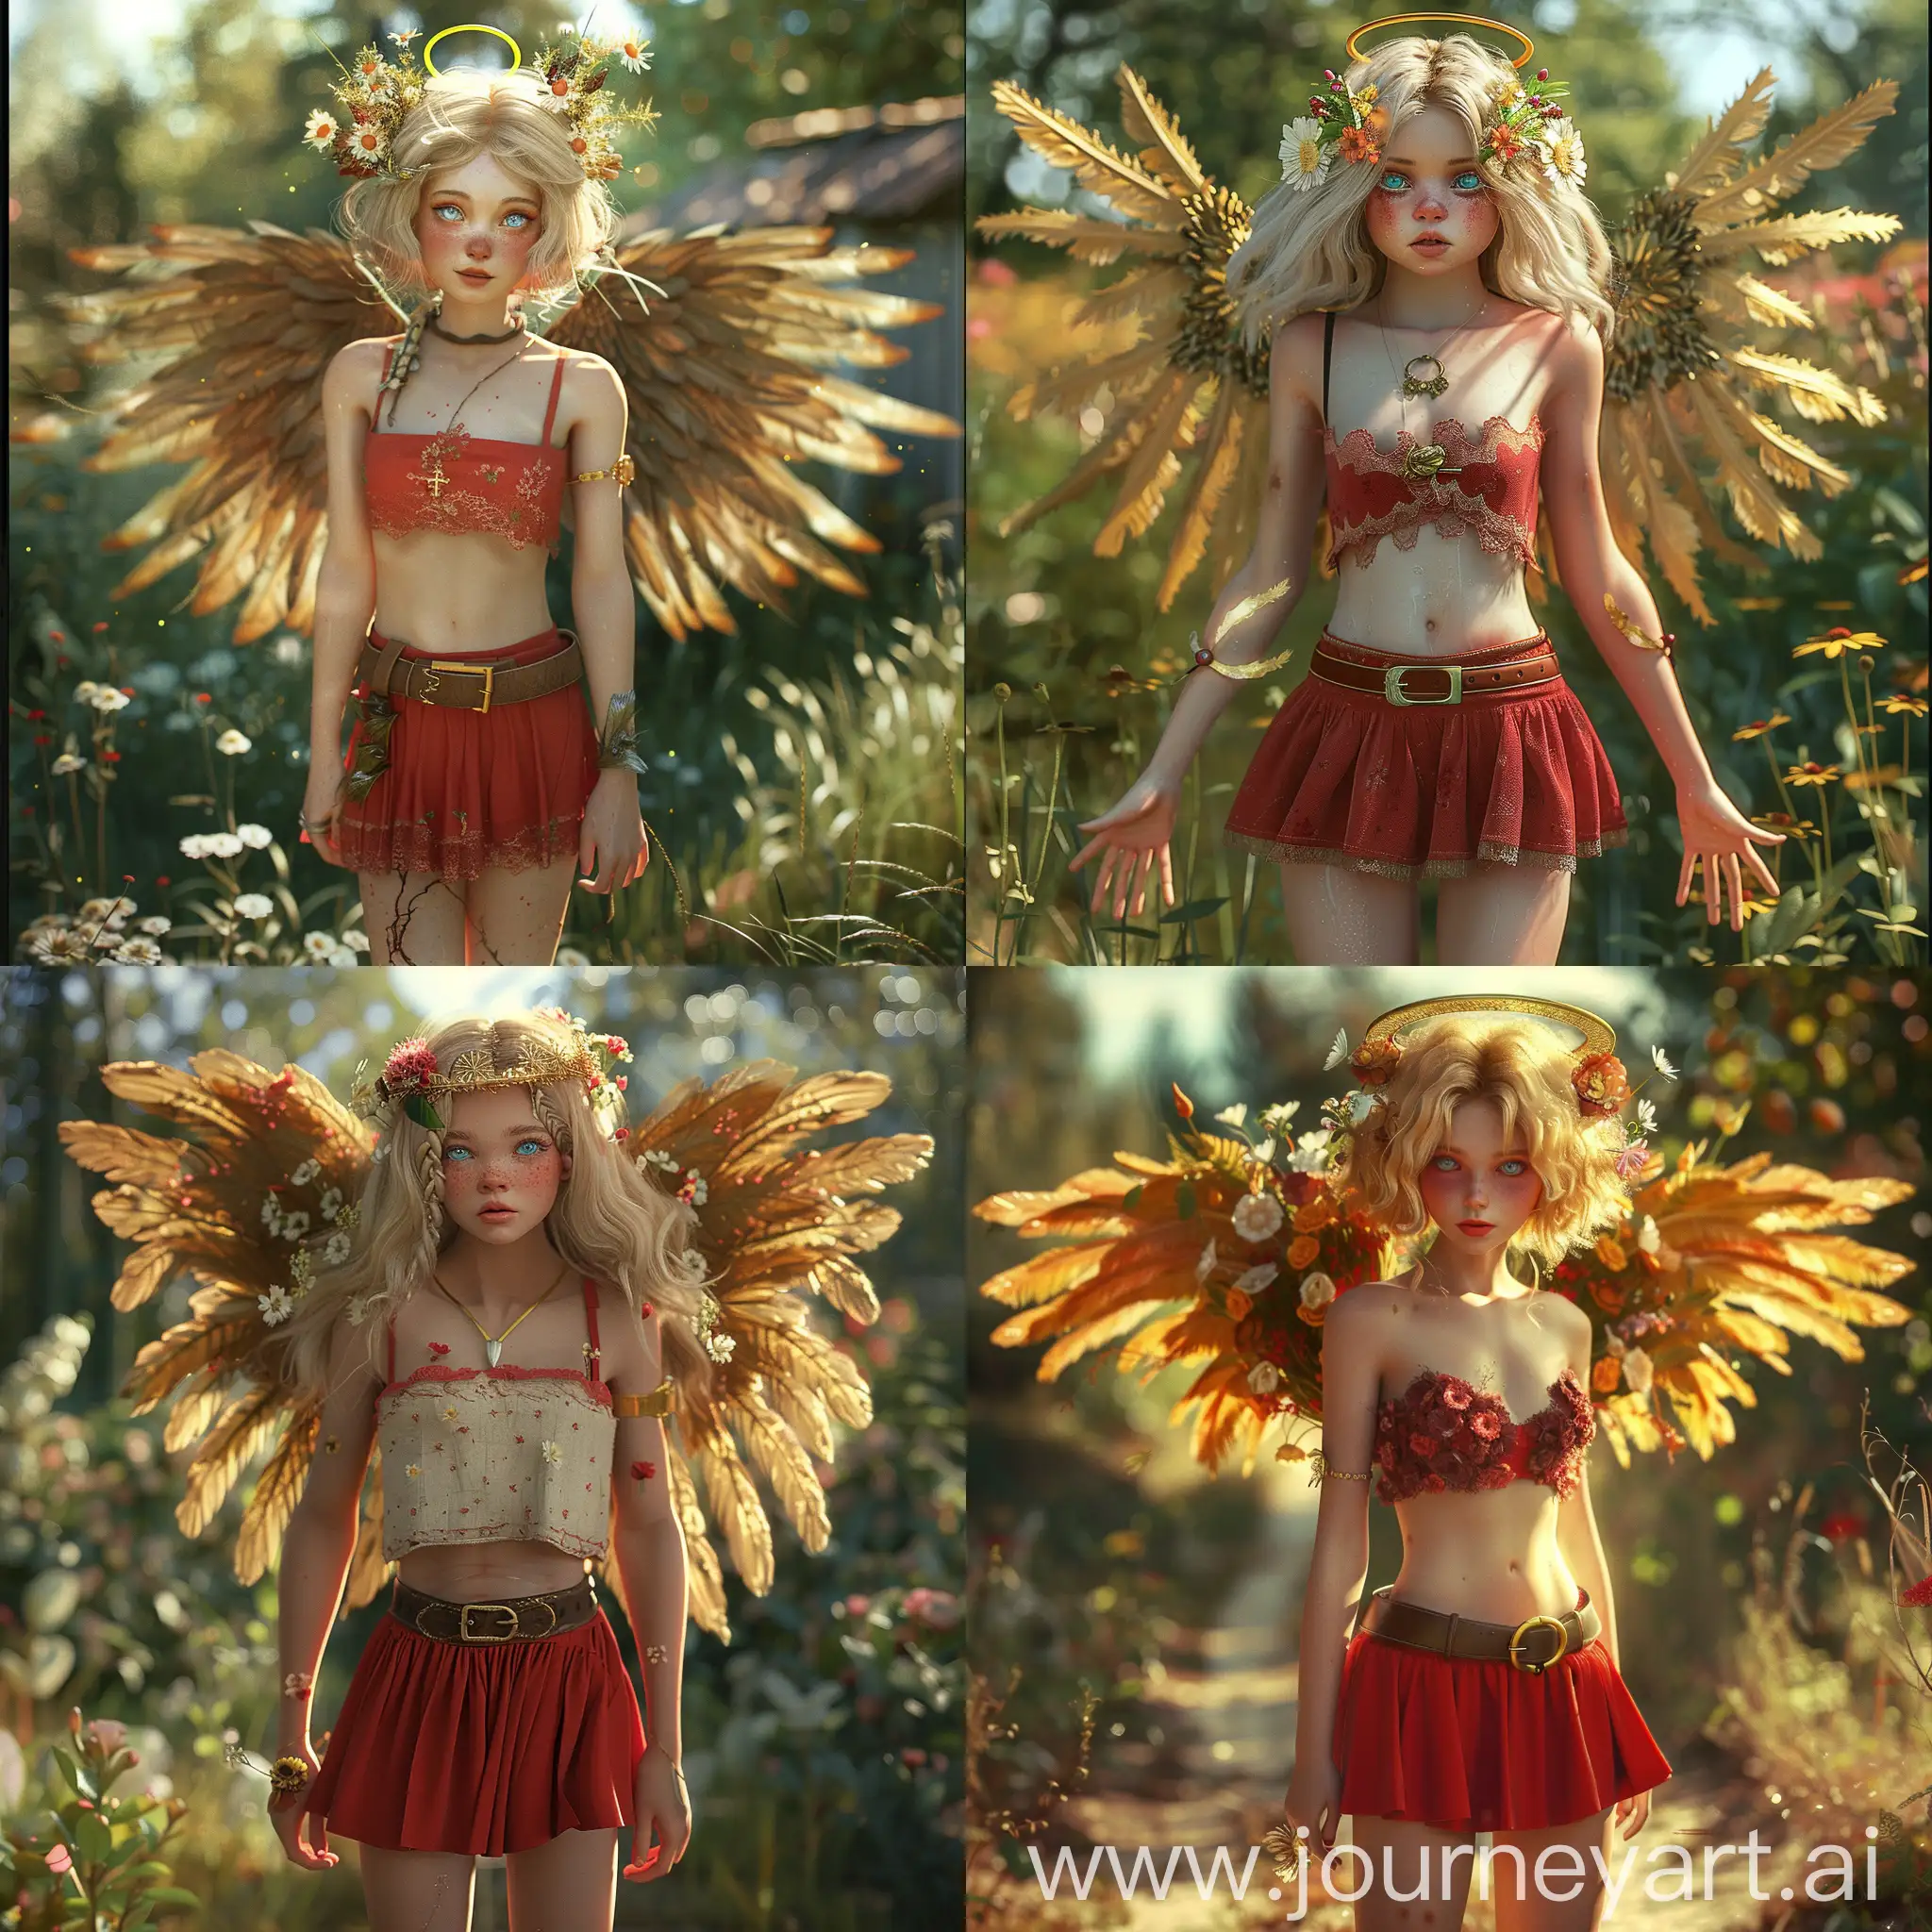 1 girl, solo, hyper-realistic,beautiful, cute, blush, fair hair, flowers in hair, sky blue eyes, golden halo, wearing red skirt, short skirt, belt with buckle, have golden feathered wings, bare legs, bare feet, full body, outside, garden